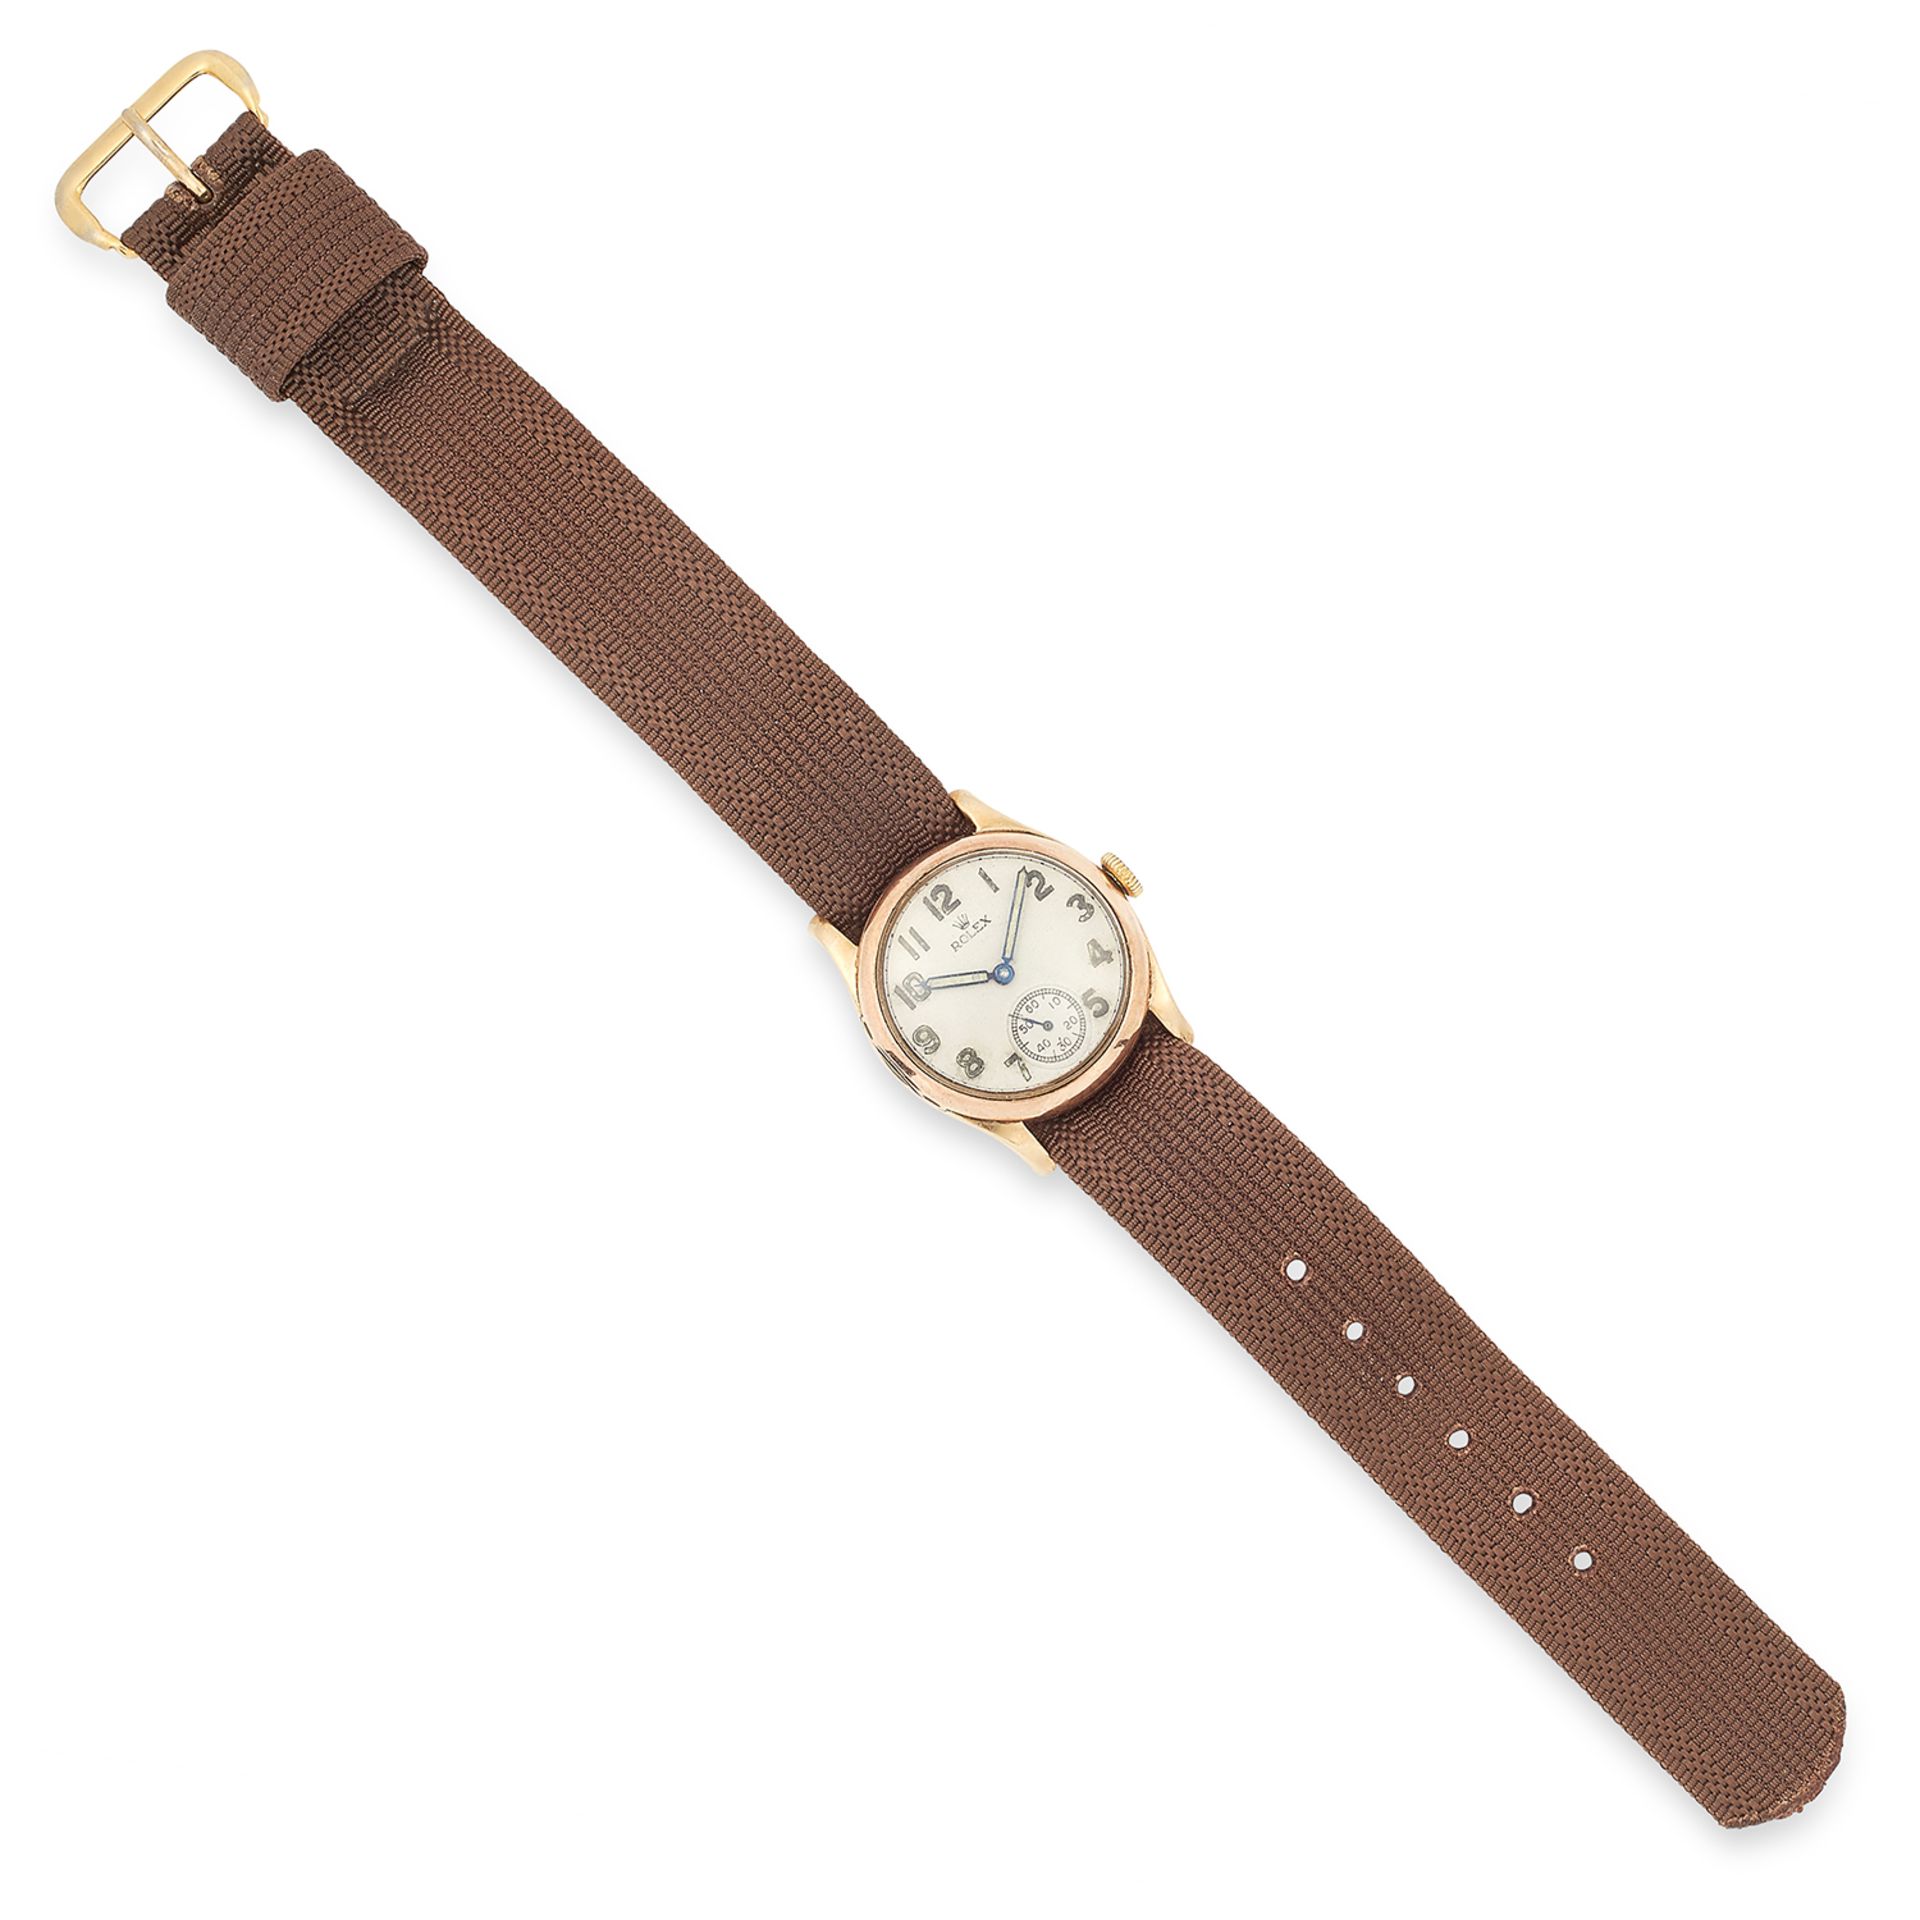 WRISTWATCH, ROLEX with a gold bezel and brown fabric strap, 22.5cm, 22.7g.